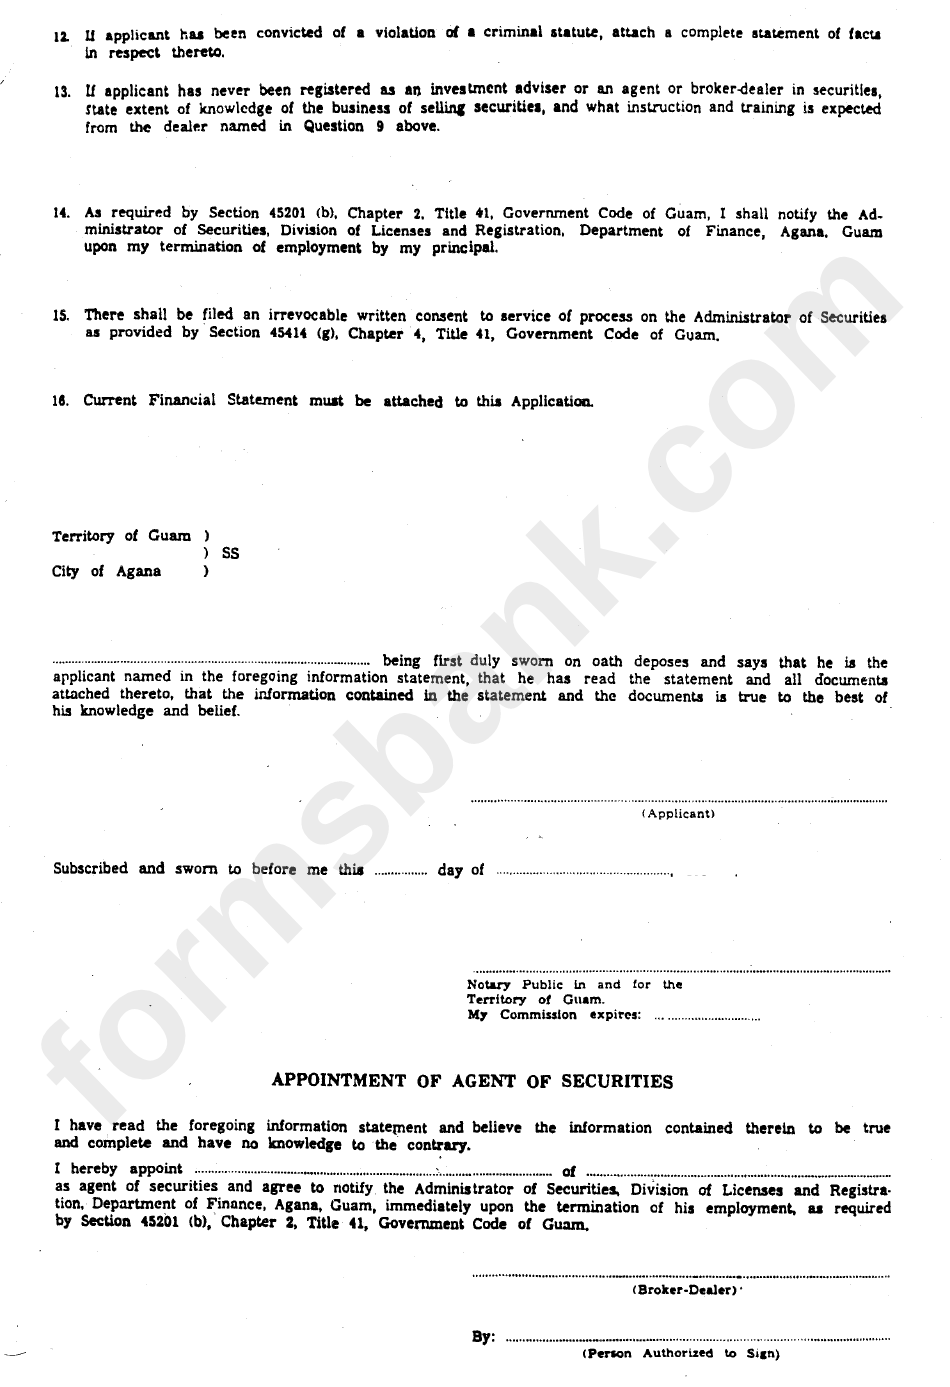 Form Fcn 2-2-153 - Application For Registration As Agent Of Securities